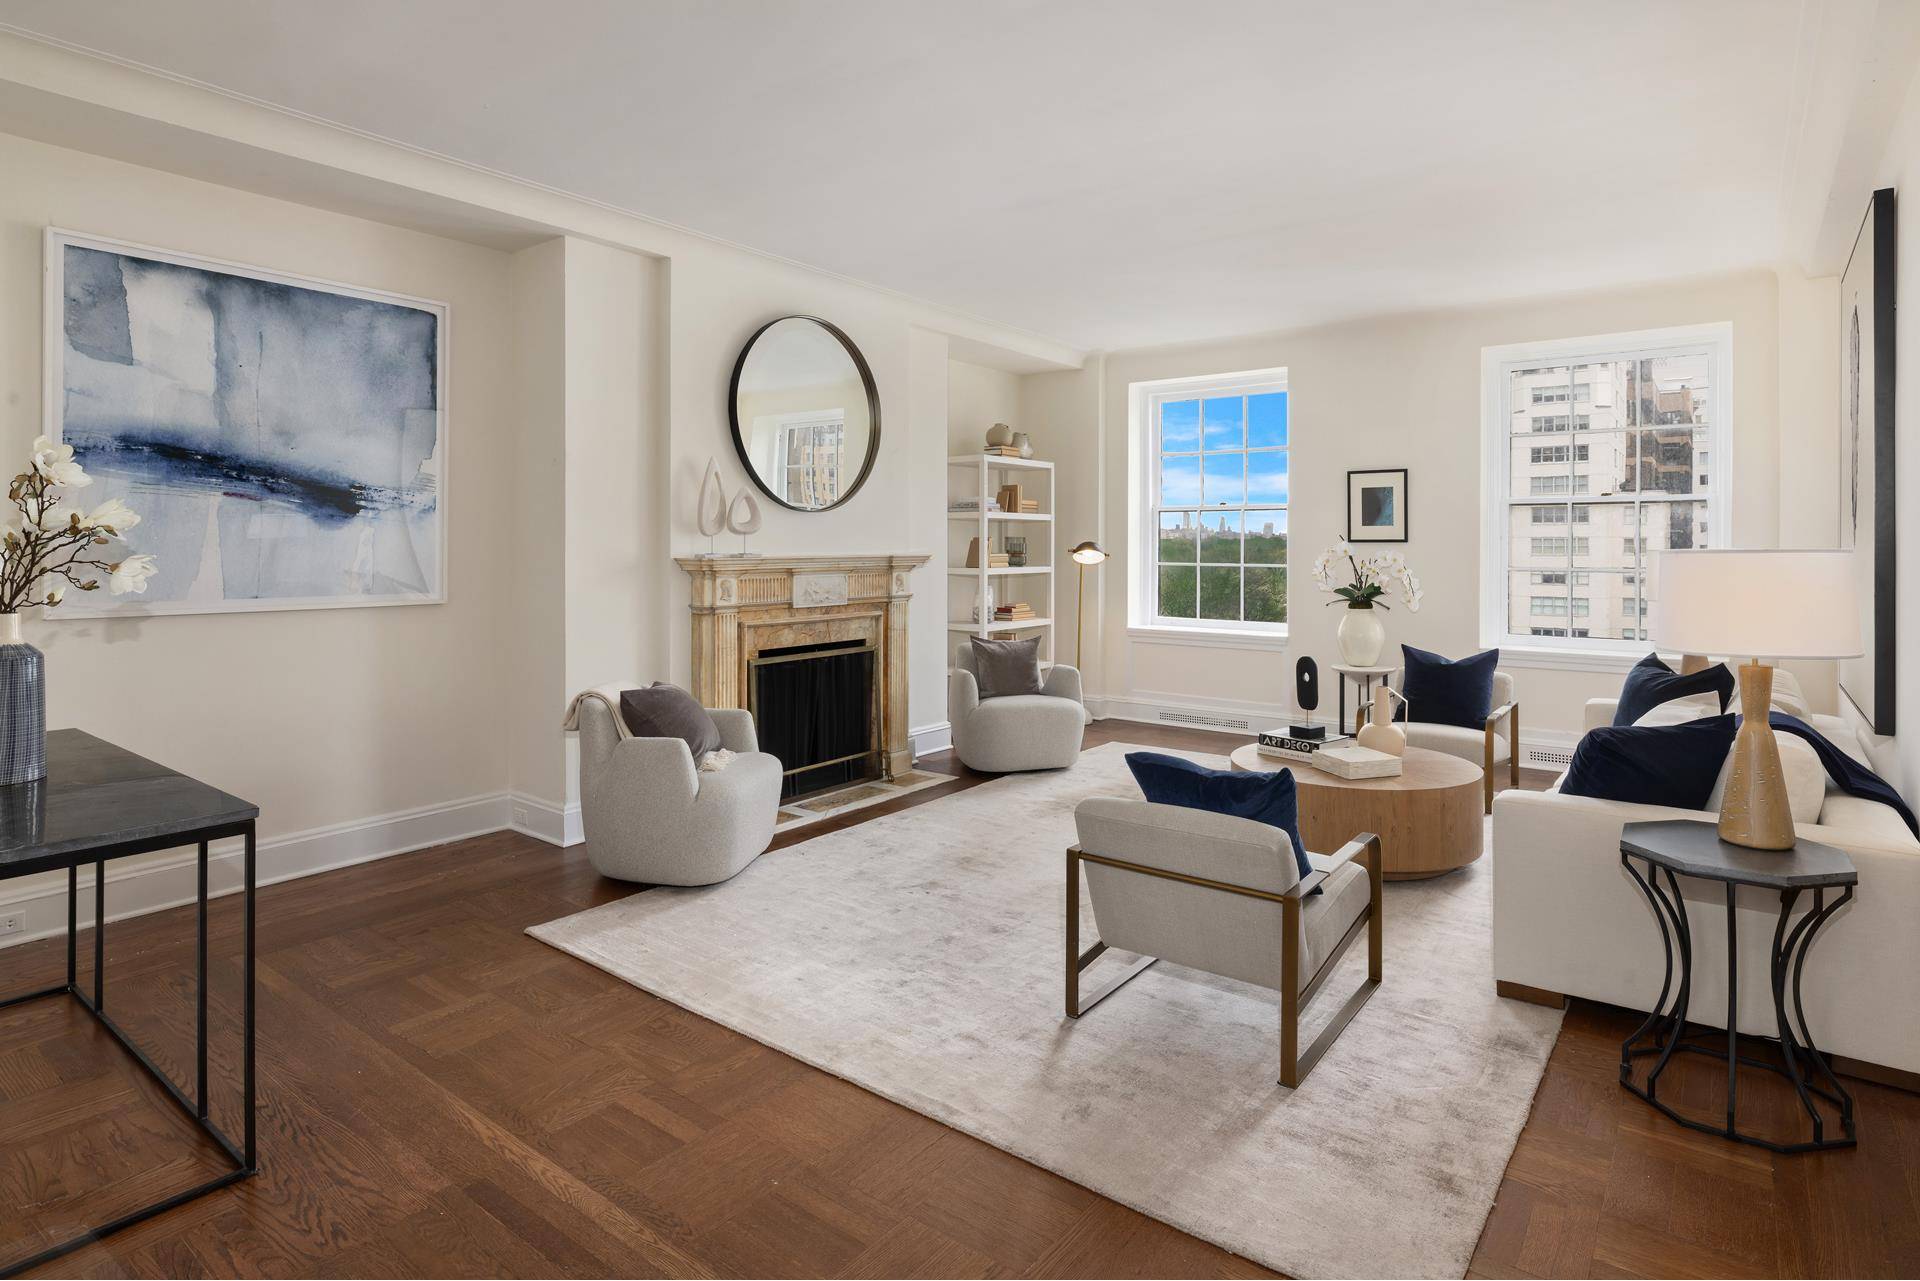 VIEWS OF CENTRAL PARK AND THE FRICK GARDENSRarely available a high floor, 2 bedroom, 2 bath residence nestled within one of the Upper East Side's most distinguished pre war buildings, ...